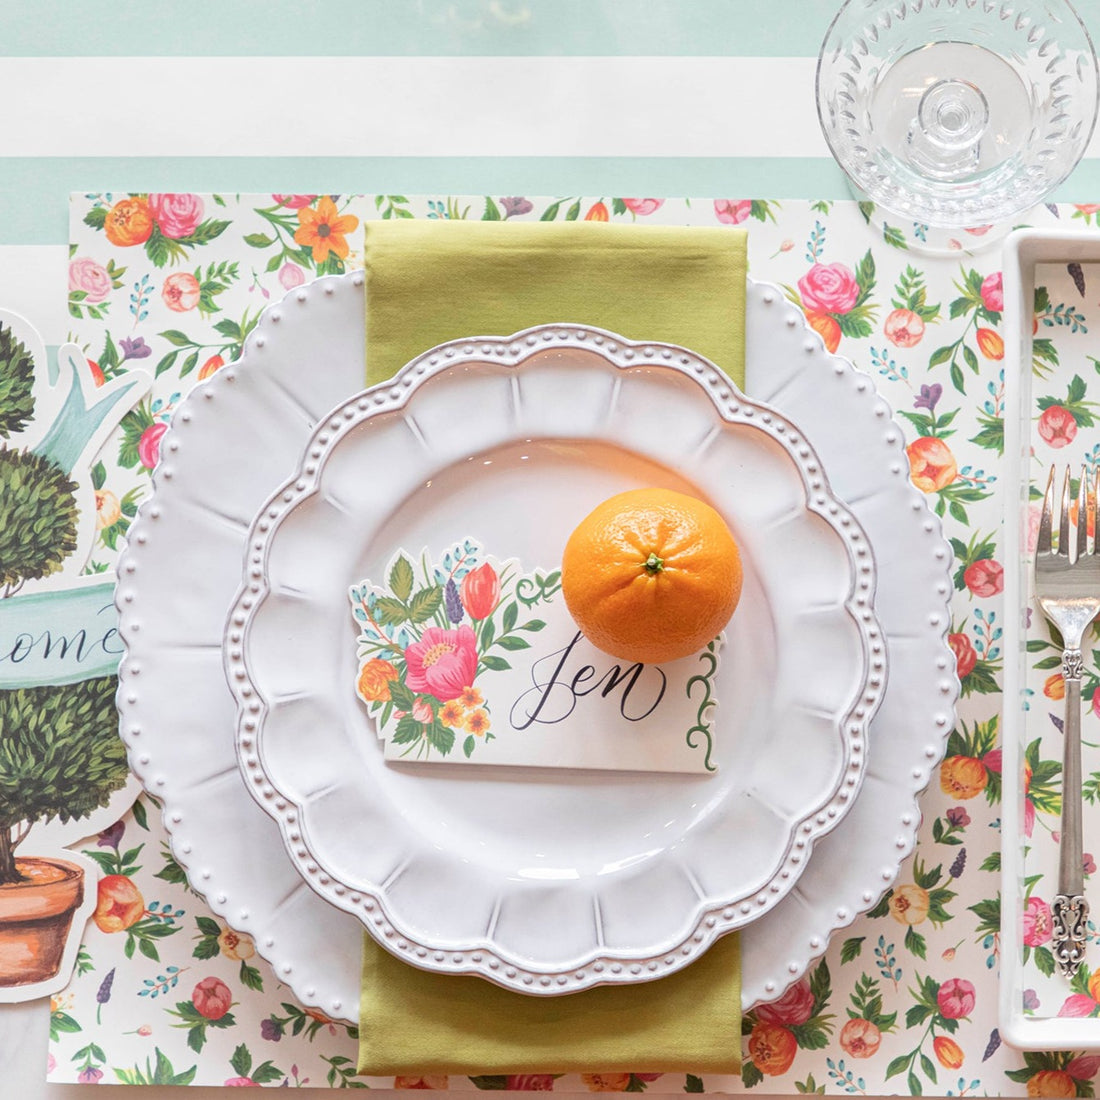 The Sweet Garden Placemat under an elegant springtime place setting, from above.